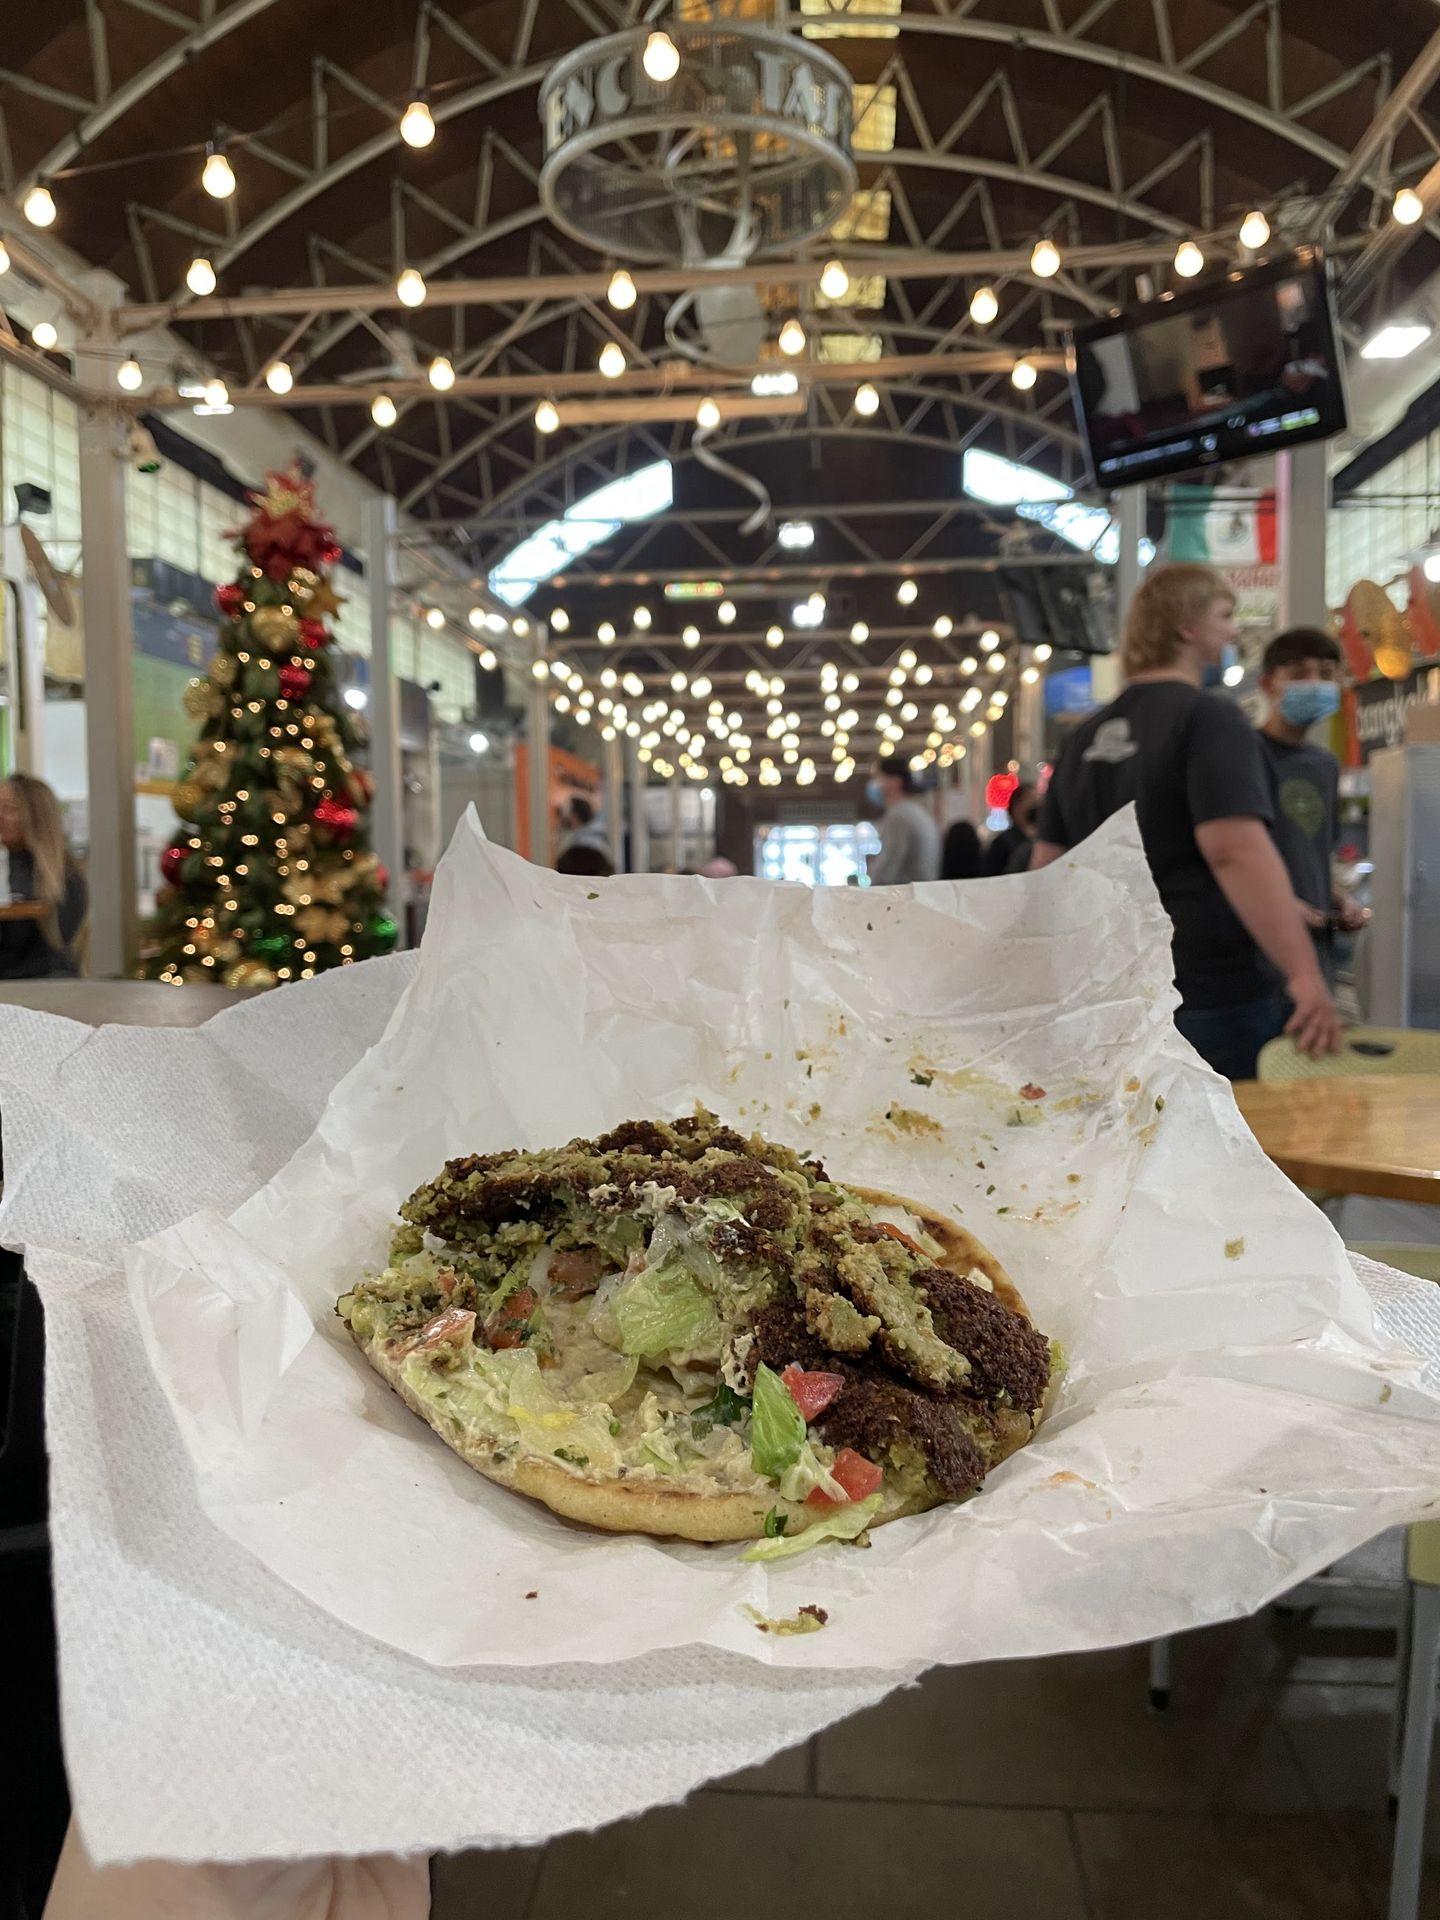 A falafel gyro being held up in the Little Rock Central Market. There is falafel, lettuce and tomato on pita bread.